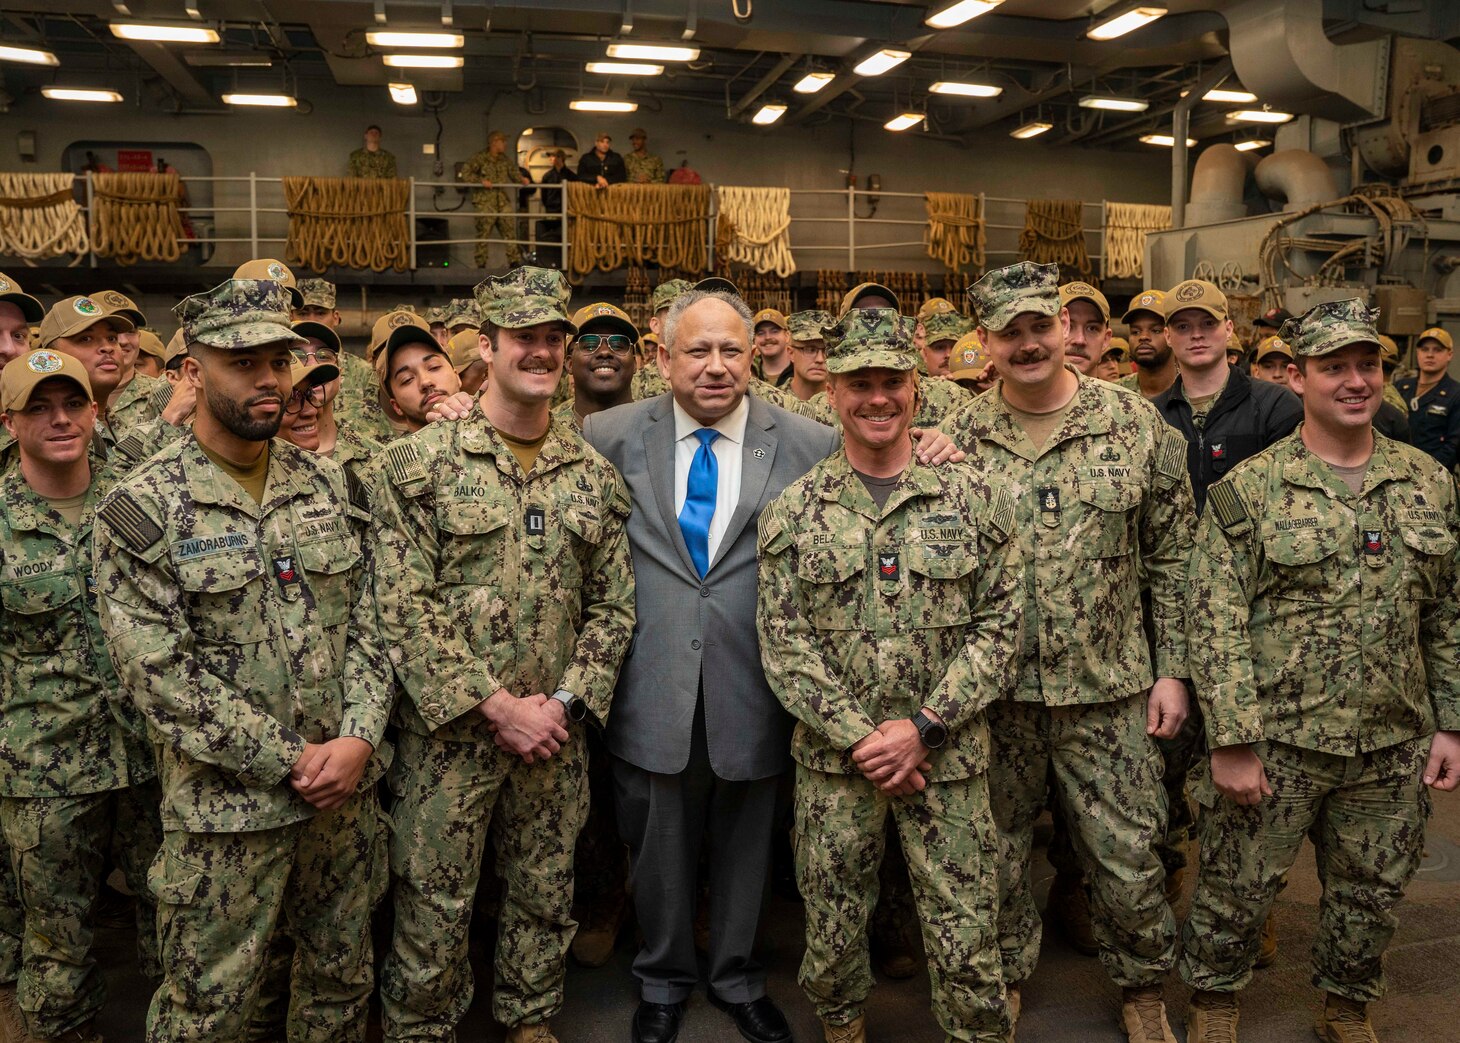 VIRGINIA BEACH, Va. - Secretary of the Navy Carlos Del Toro meets with Sailors during an all-hands call aboard the Harpers Ferry-class dock landing ship USS Carter Hall (LSD 50), at Joint Expeditionary Base Little Creek-Fort Story, Mar. 10, 2023. Secretary Del Toro is in Virginia Beach to thank U.S. service members assigned to USS Carter Hall (LSD 50), Explosive Ordnance Disposal Group 2, Mobile Diving and Salvage Unit 2, Helicopter Mine Countermeasures Squadron 15, and Helicopter Sea Combat Squadron 28 for their hard work during recent high-altitude surveillance balloon recovery operations. (U.S. Navy photo by Mass Communication Specialist 1st Class Ryan Seelbach)